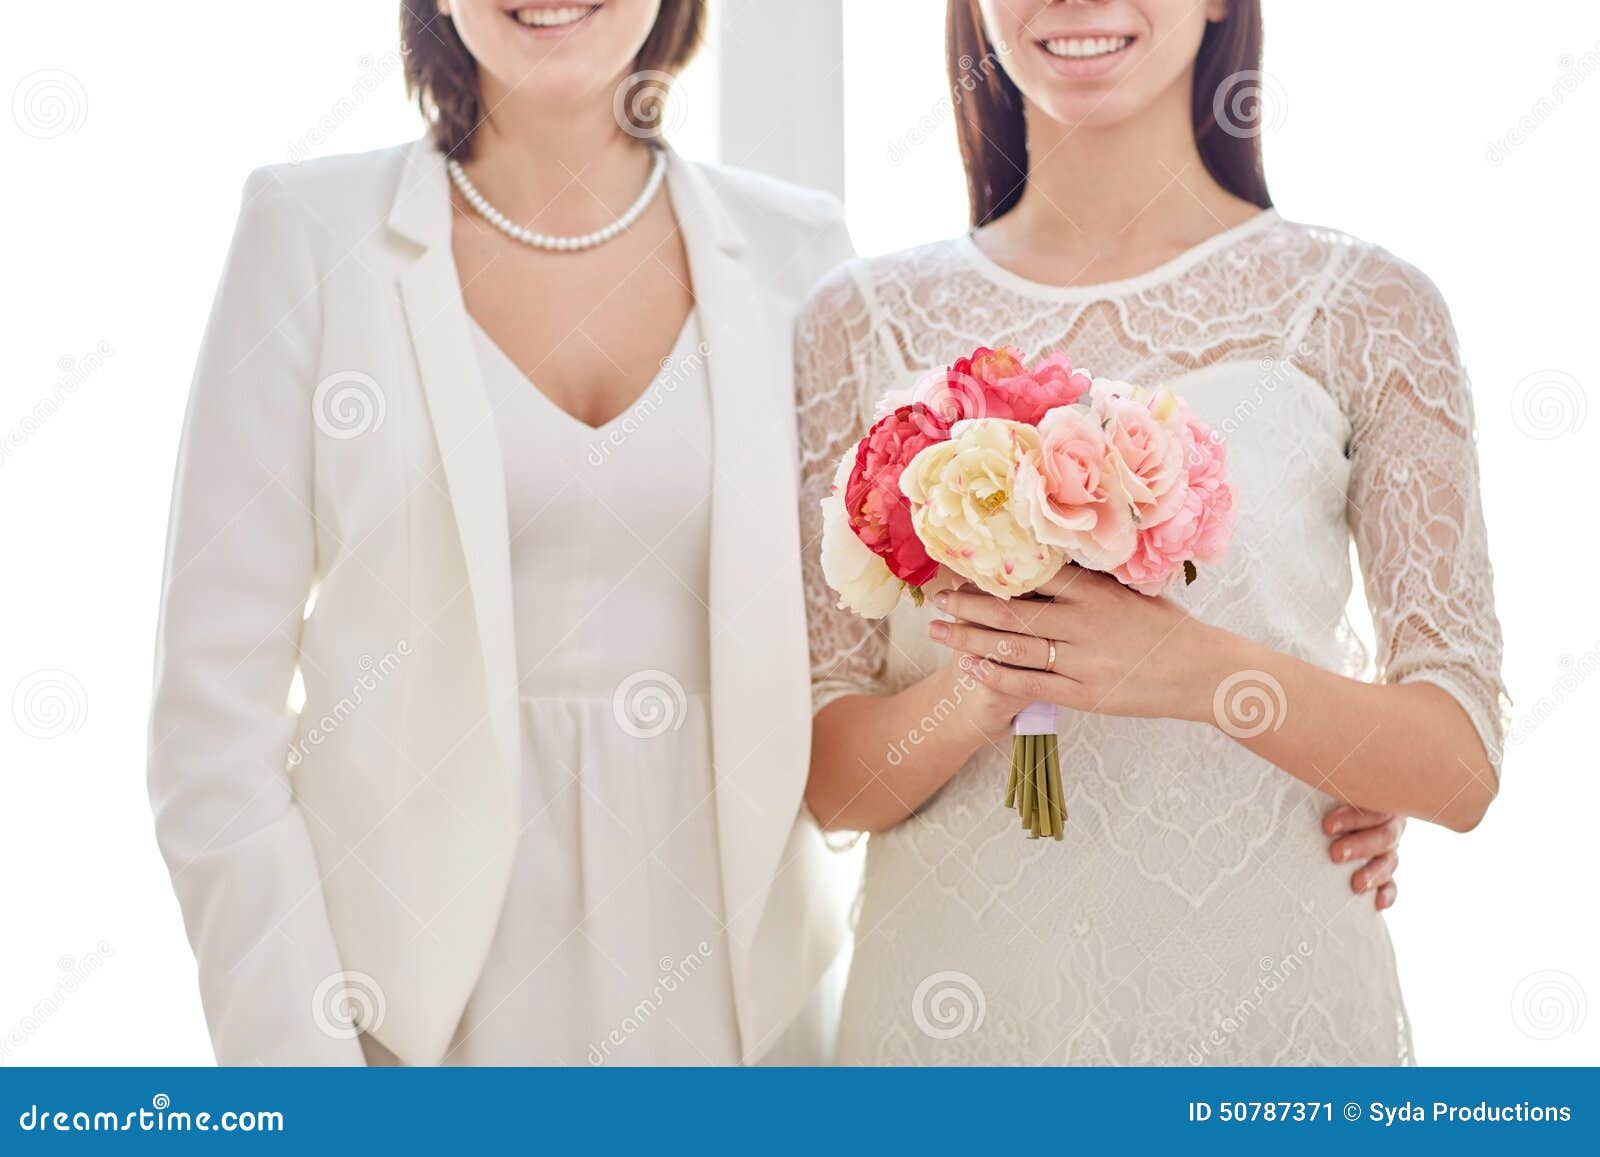 Close Up Of Happy Lesbian Couple With Flowers Stock Image Image Of Hands Lesbian 50787371